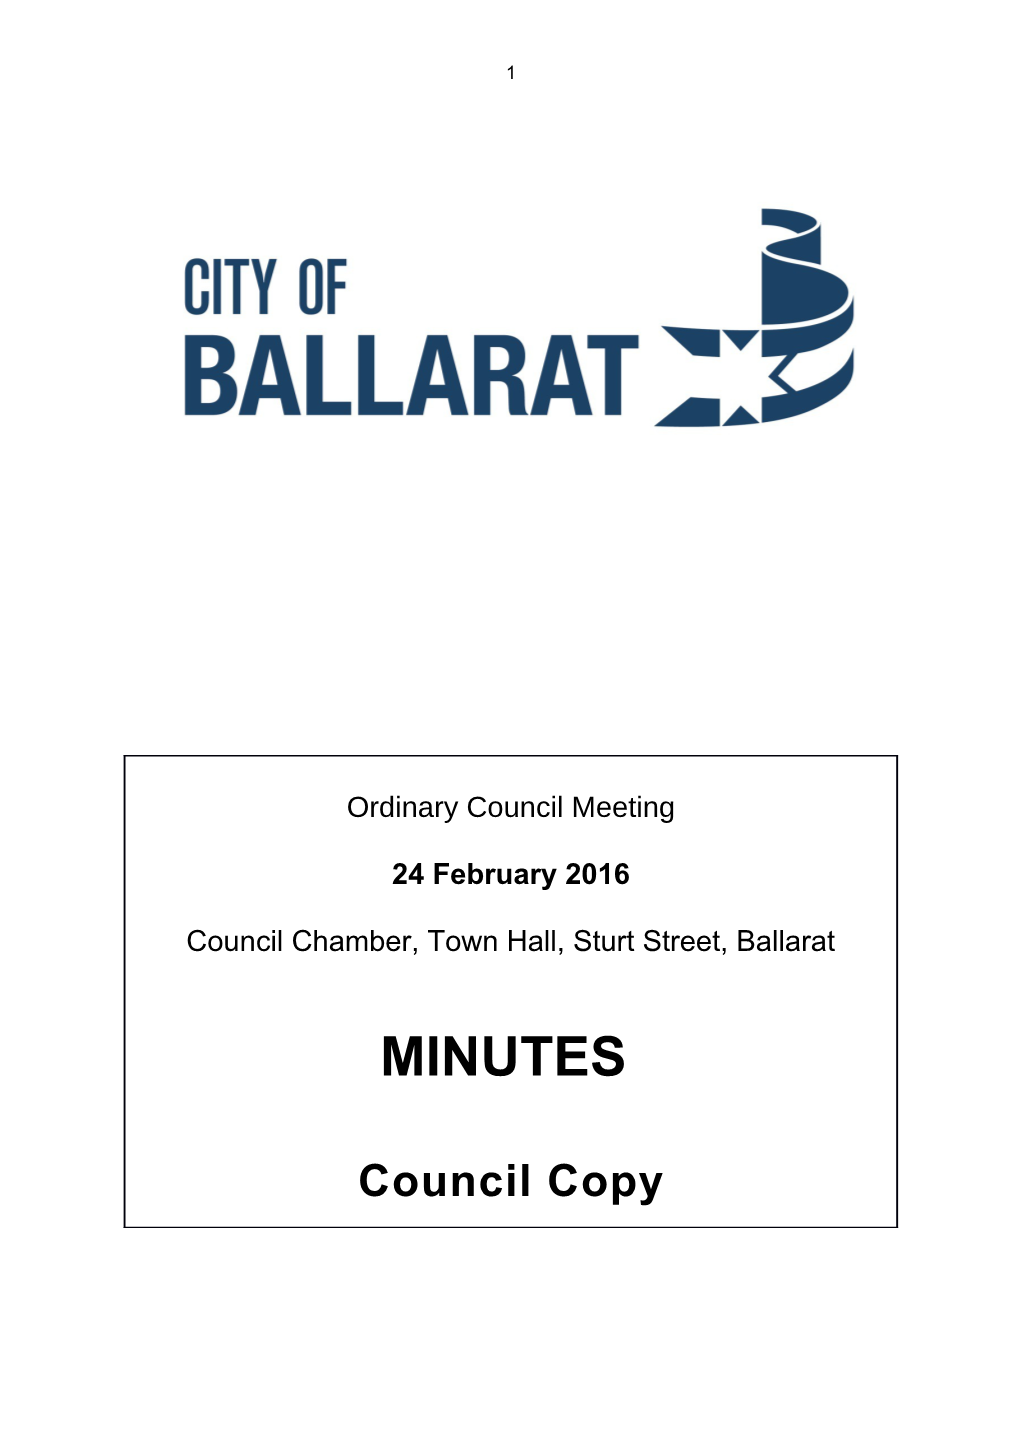 Pro-Forma Minutes of Council Meeting - 24 February 2016